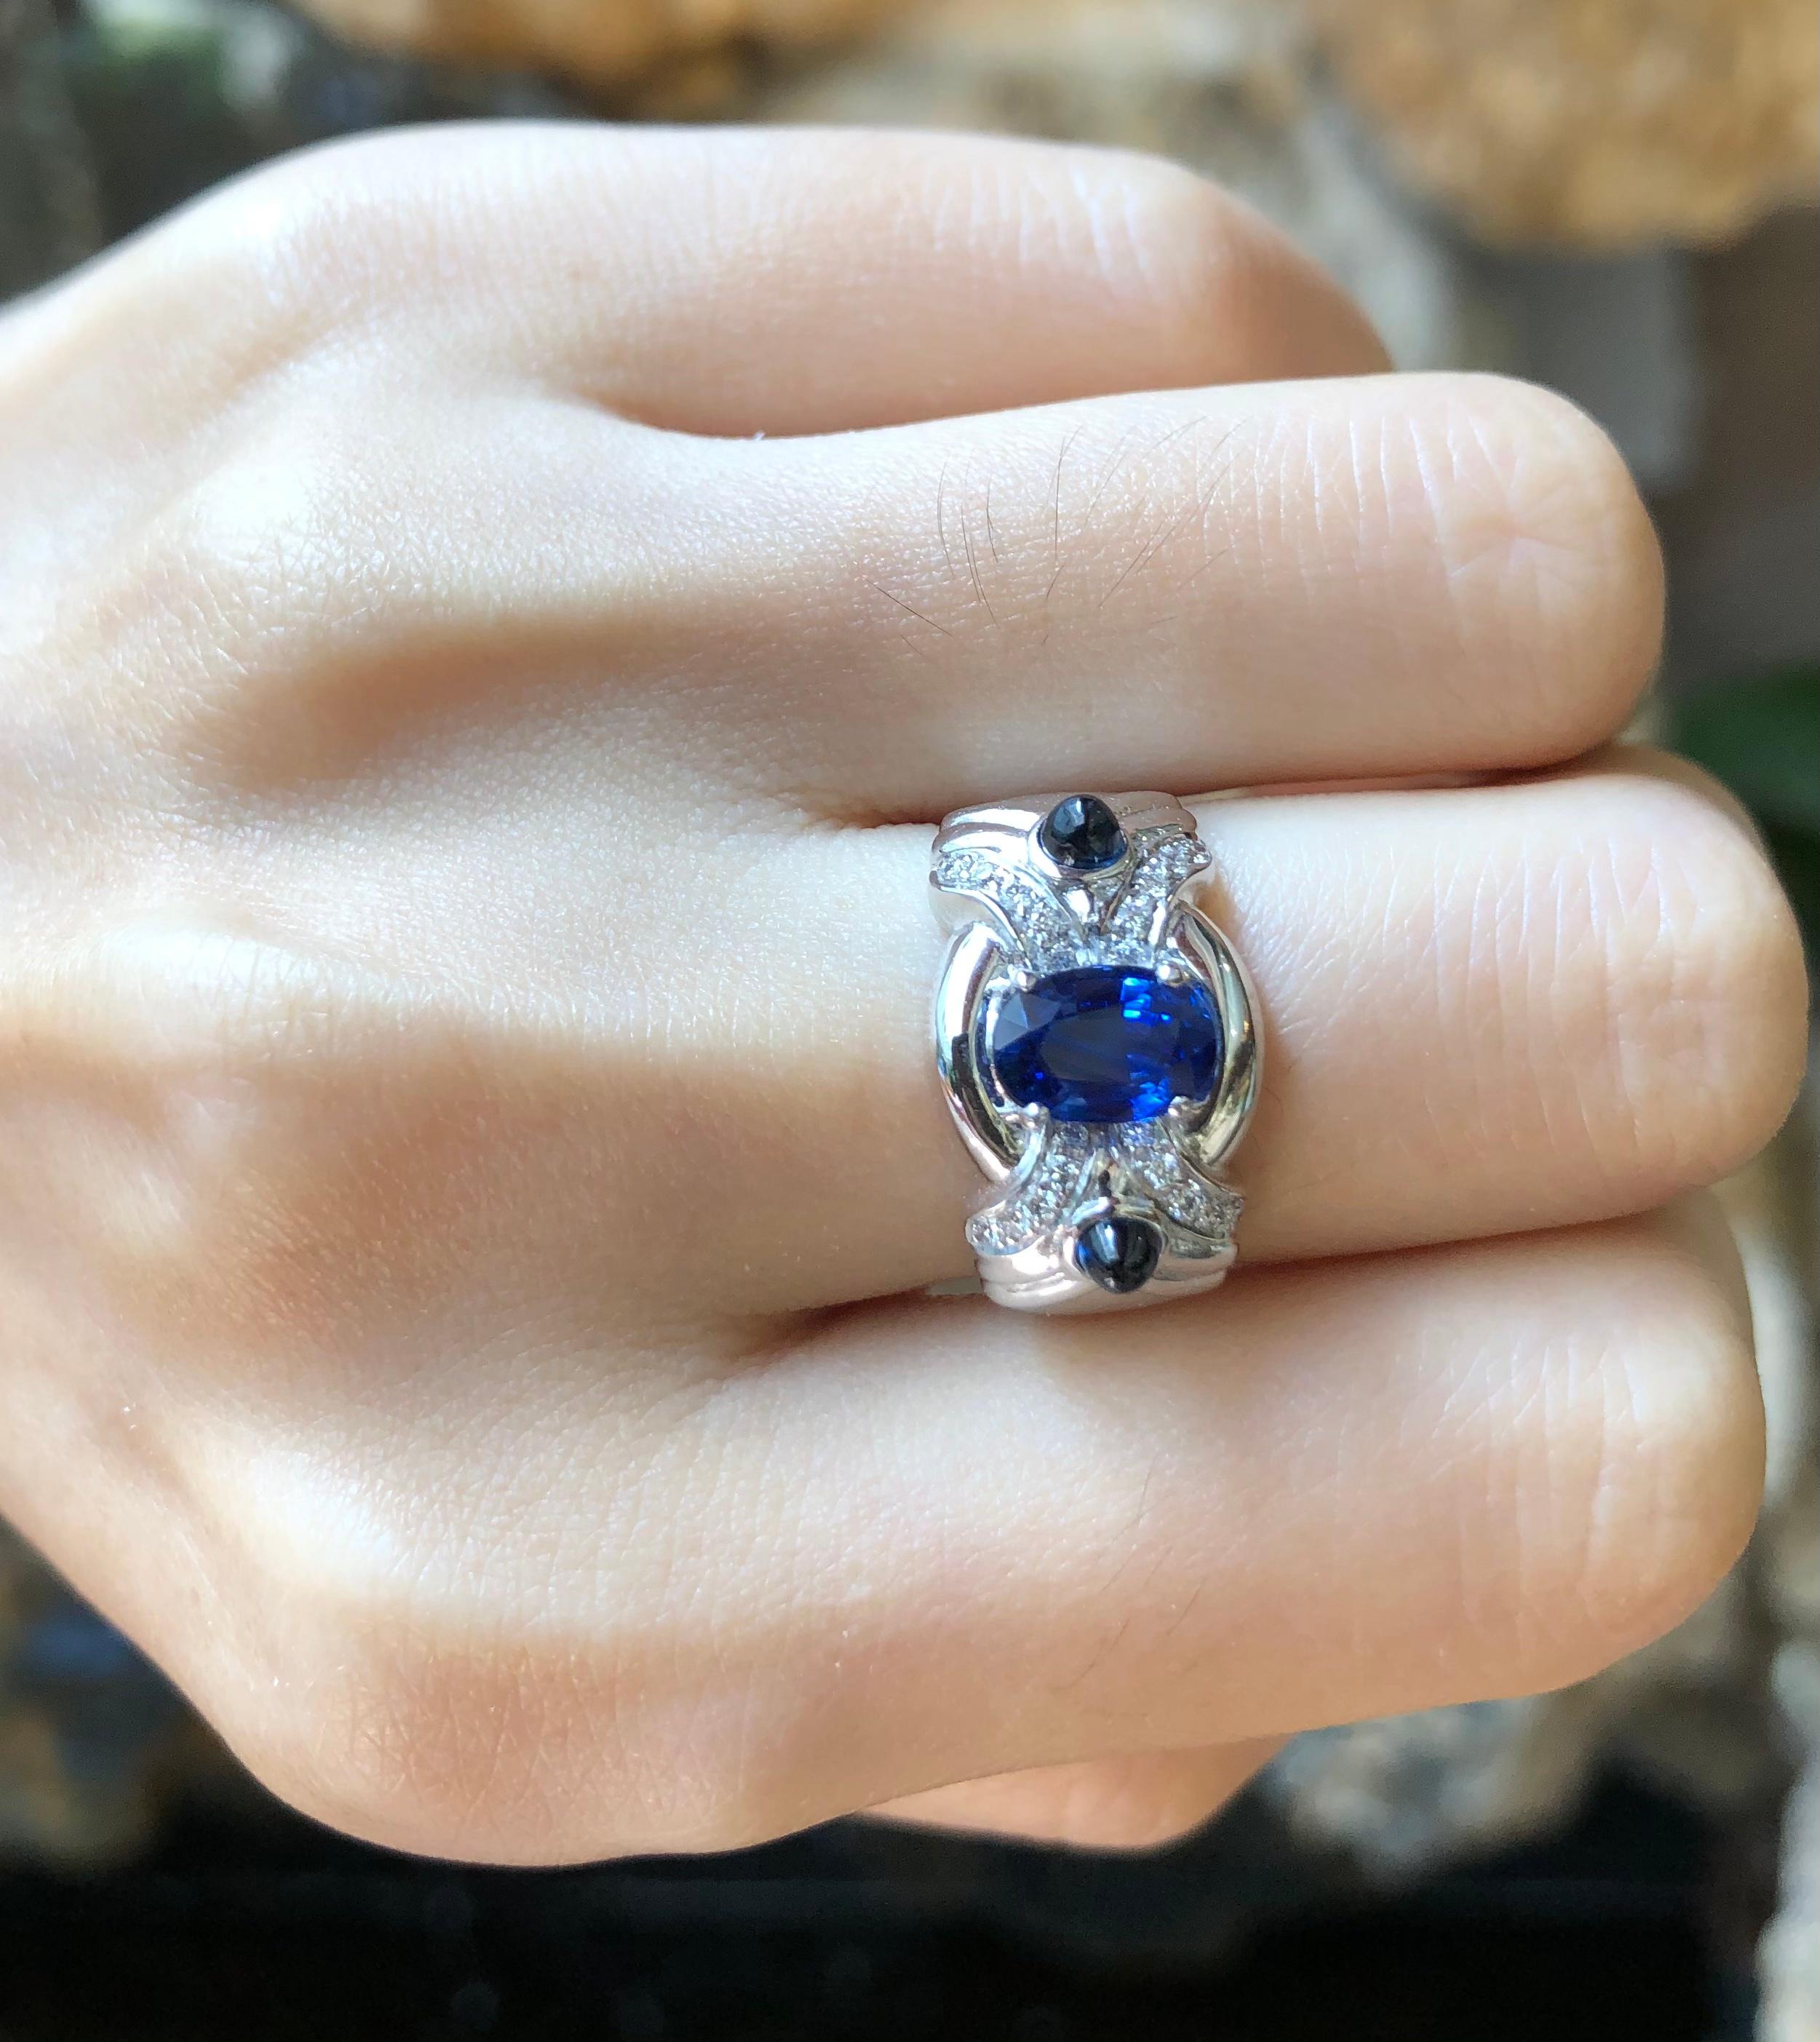 Blue Sapphire 1.38 carats with Diamond 0.16 carat and Cabochon Blue Sapphire 0.54 carat Ring set in 18 Karat White Gold Settings

Width:  1.8 cm 
Length: 1.1 cm
Ring Size: 52
Total Weight: 6.99 grams

